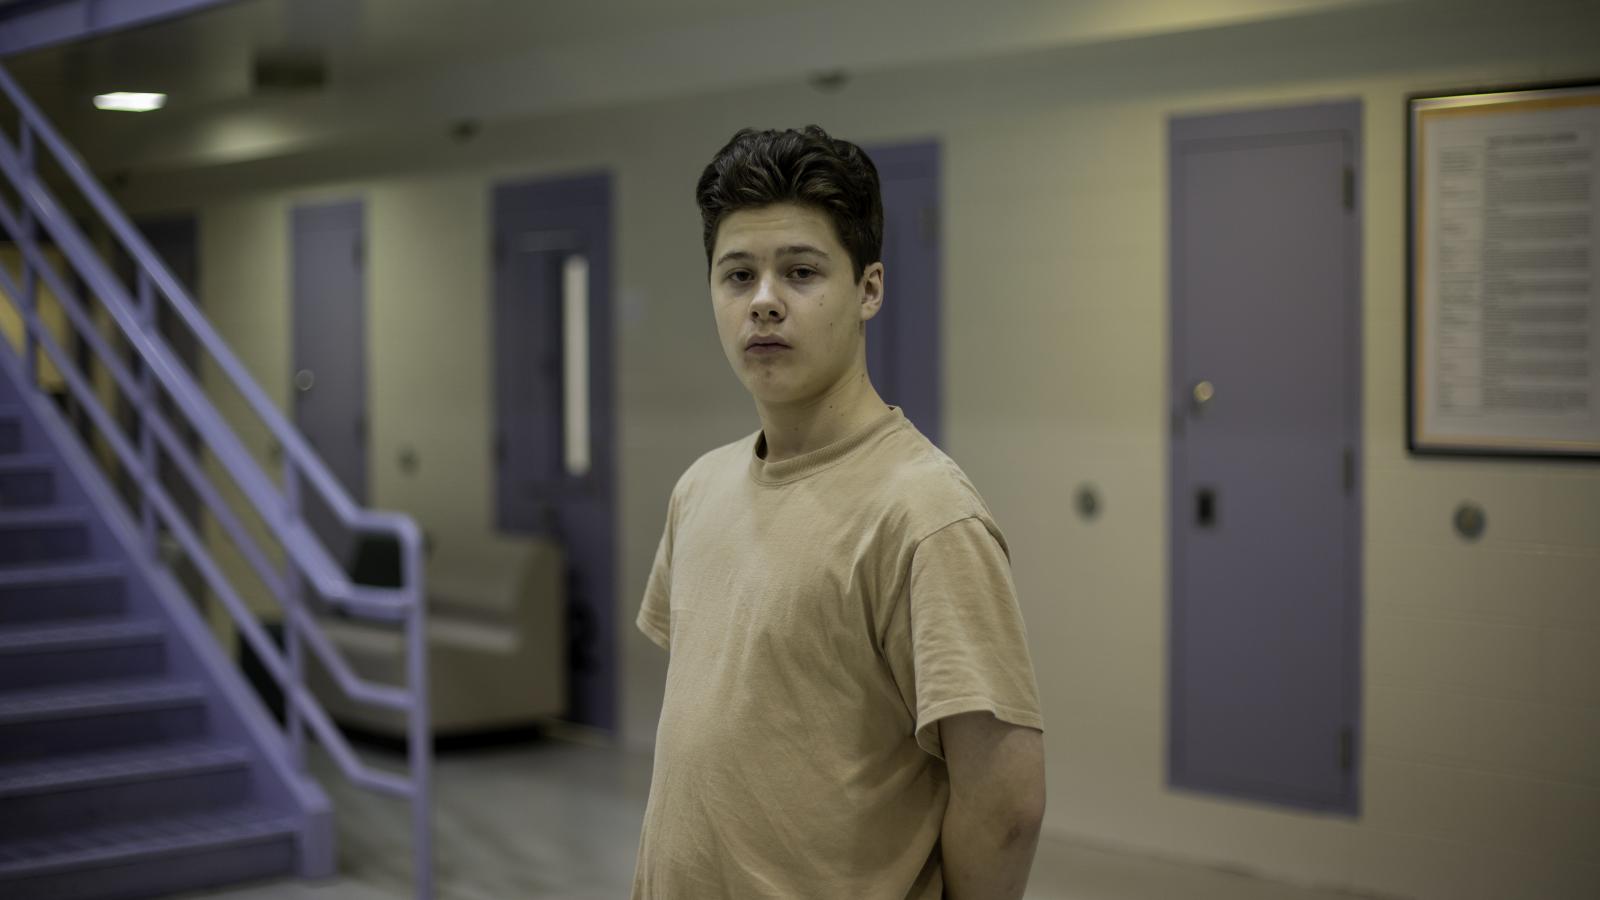 Teenager standing alone in juvenile facility